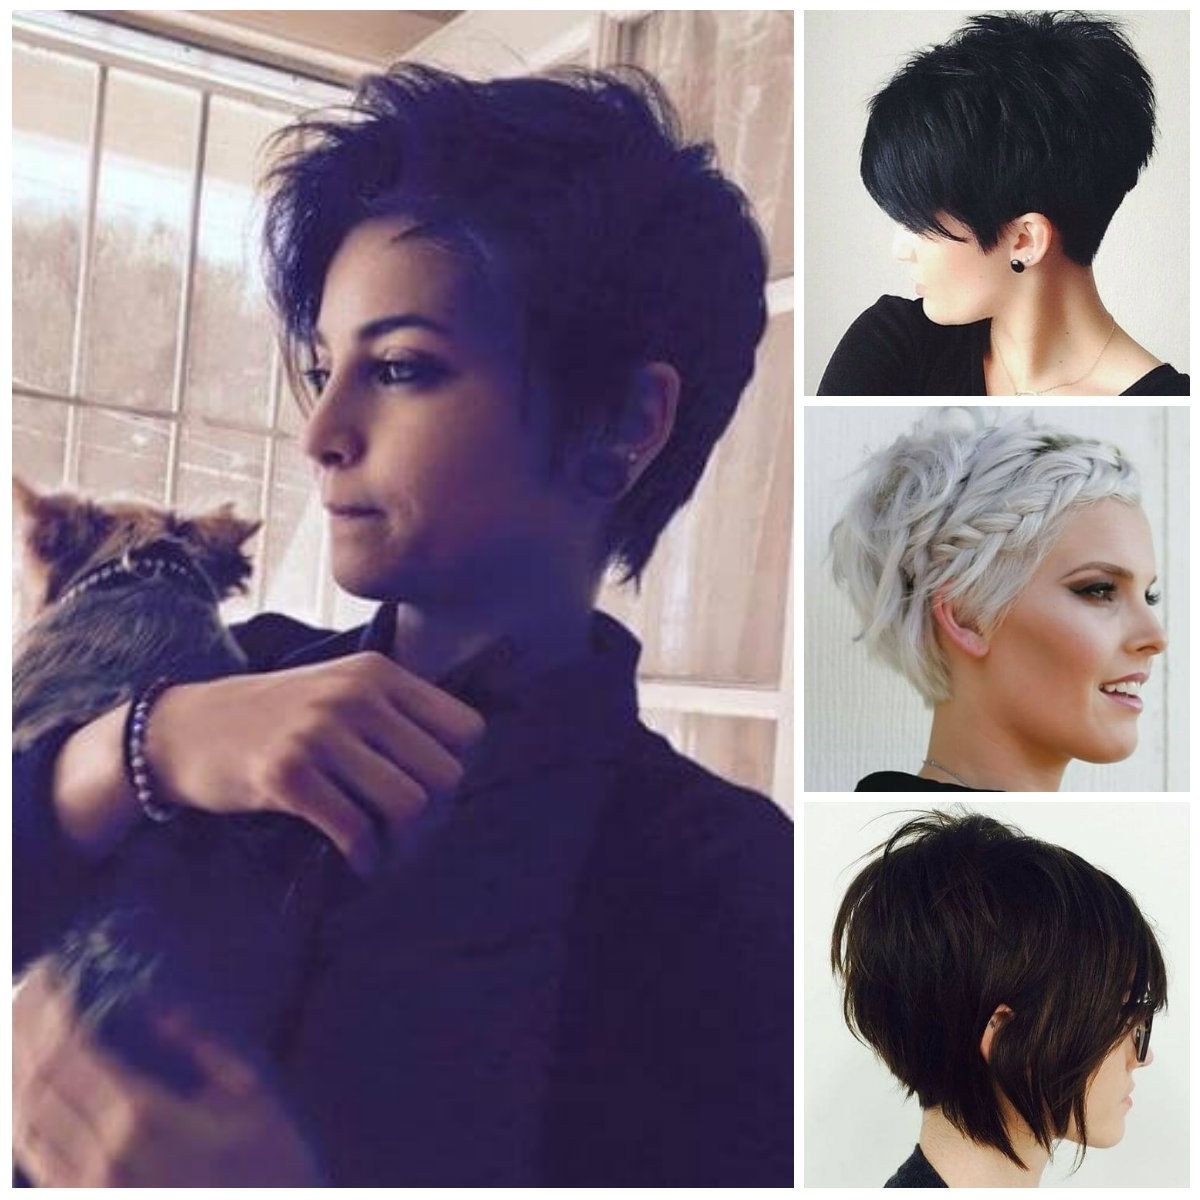 Messy Pixie Hairstyles For 2017 | Hairstyles 2018 New Haircuts And With Regard To Most Recent Messy Pixie Hairstyles (View 8 of 15)